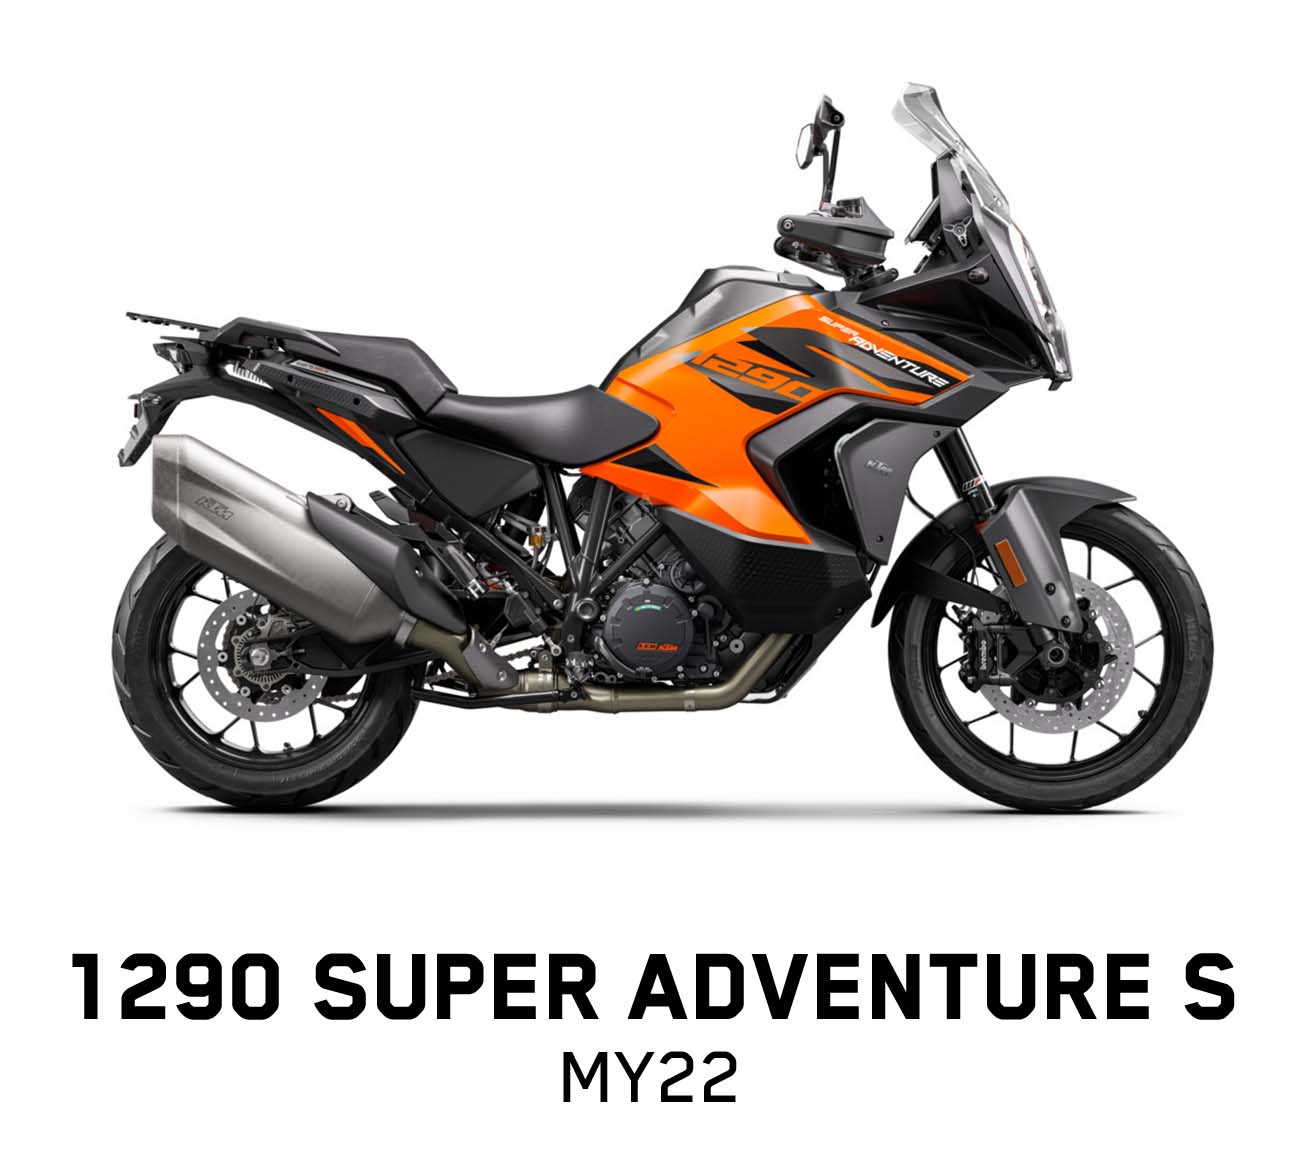 Laguna Exclusive KTM Tech Pack Offer on the 1290 Super Adventure S